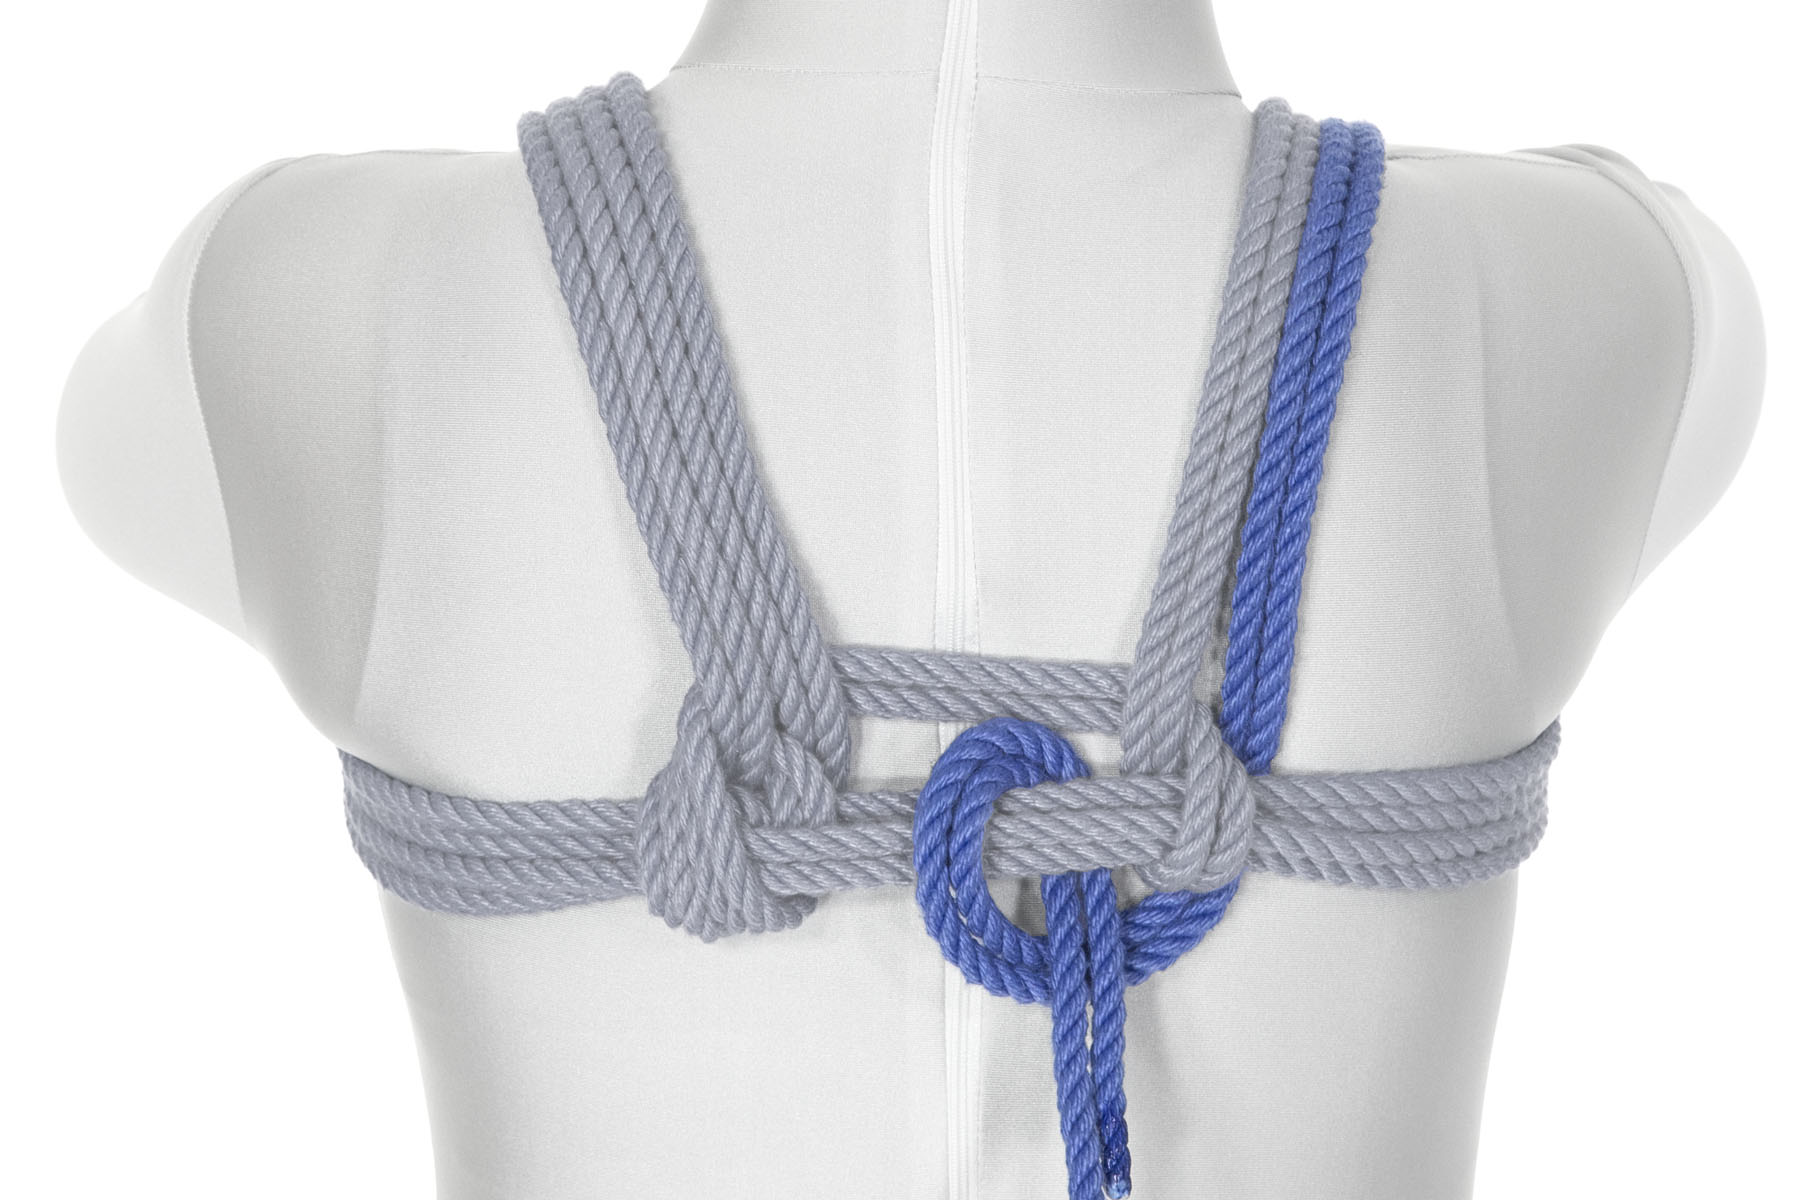 This is a rear view of the rope coming down from the shoulder on the outside of the first pass over the shoulder. It goes under the chest wraps, travels to the left, then comes over the chest wraps in between the left and right parts of the harness. It crosses back under the chest wraps just to the right, and over itself, making a half hitch.